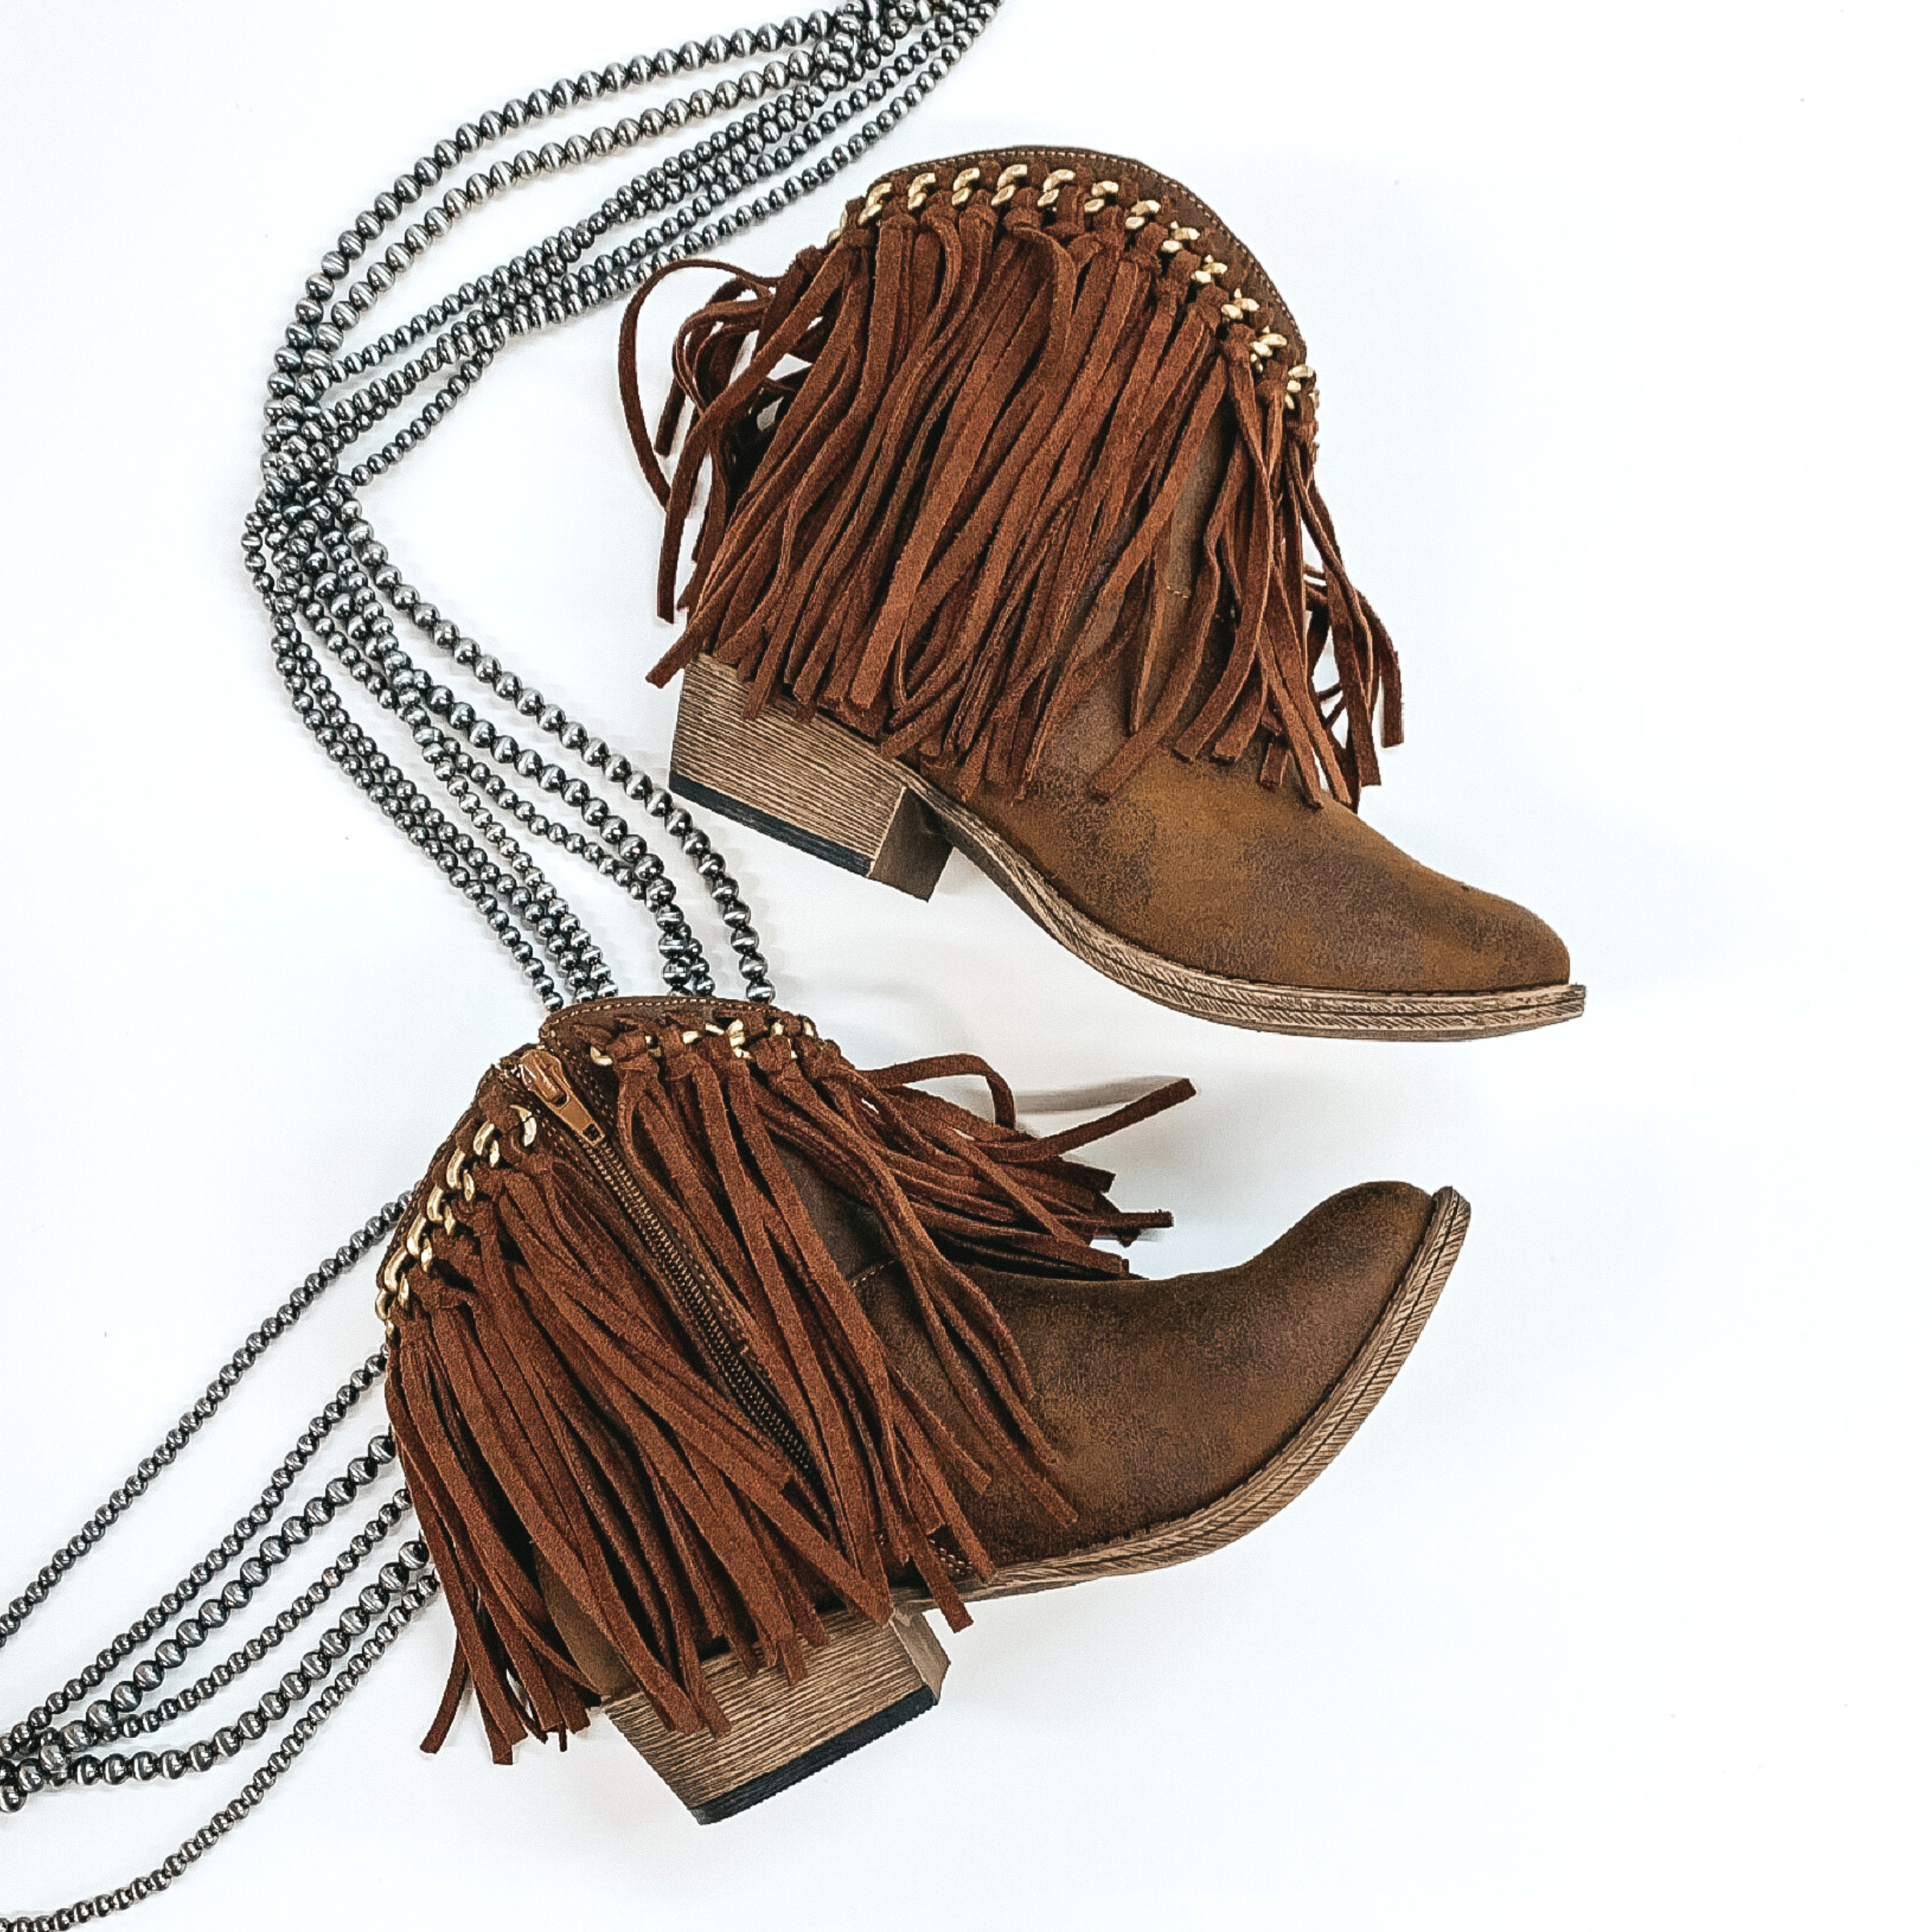 Very G | Rebel Girl Heeled Ankle Booties with Fringe in Brown - Giddy Up Glamour Boutique